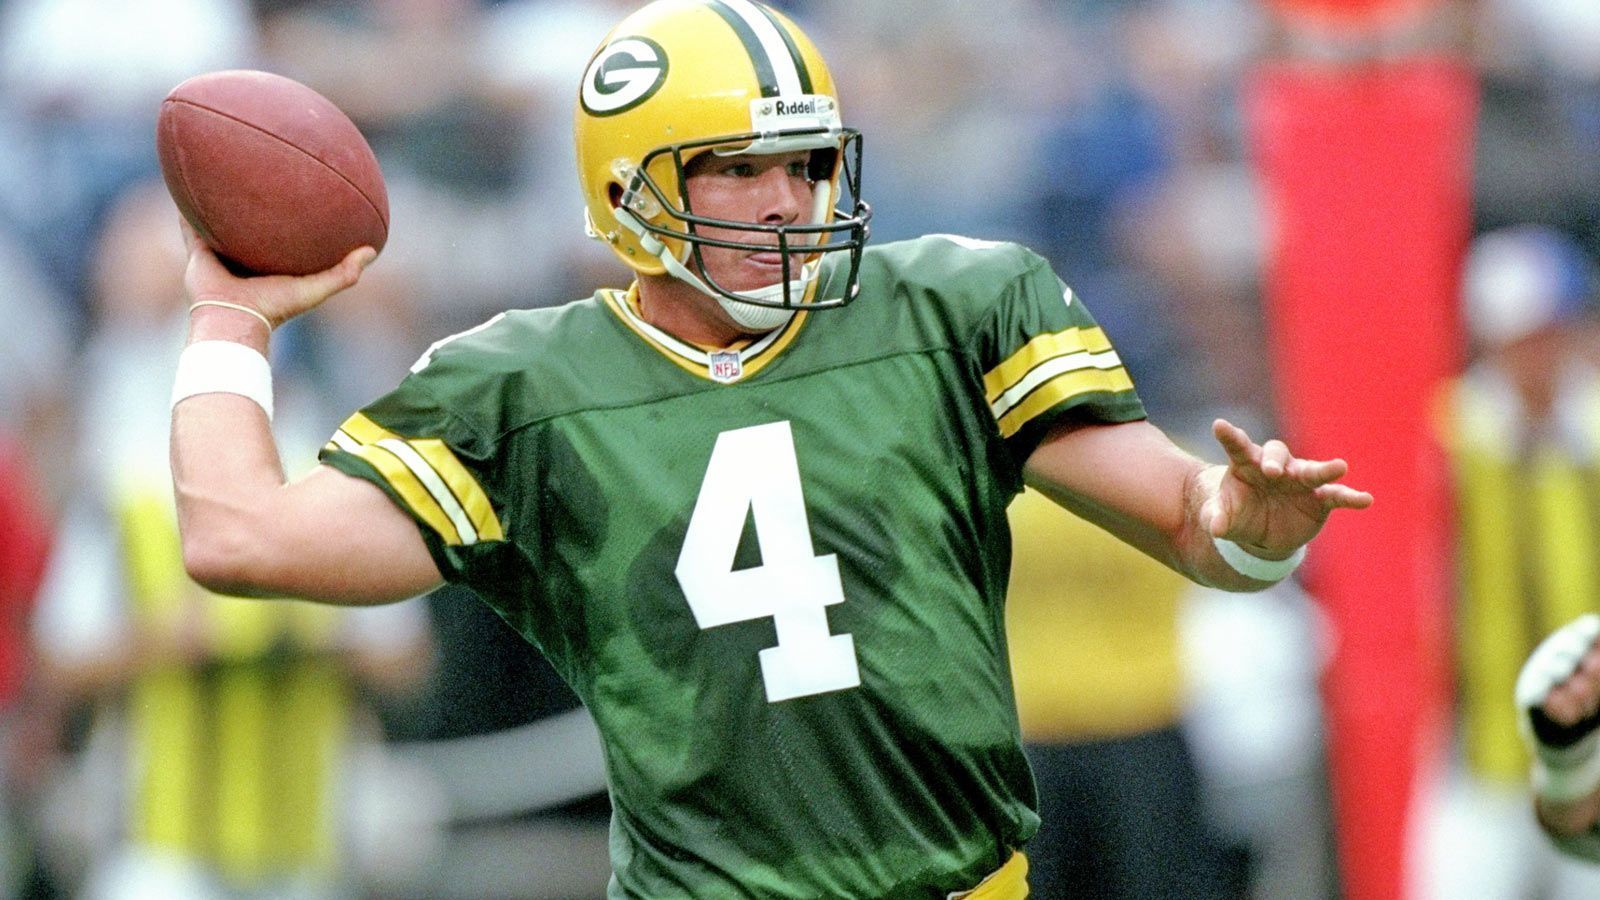 
                <strong>Green Bay Packers</strong><br>
                3 Tony Canadeo, 4 Brett Favre (Foto), 14 Don Hutson, 15 Bart Starr, 66 Ray Nitschke und 92 Reggie White. 
              